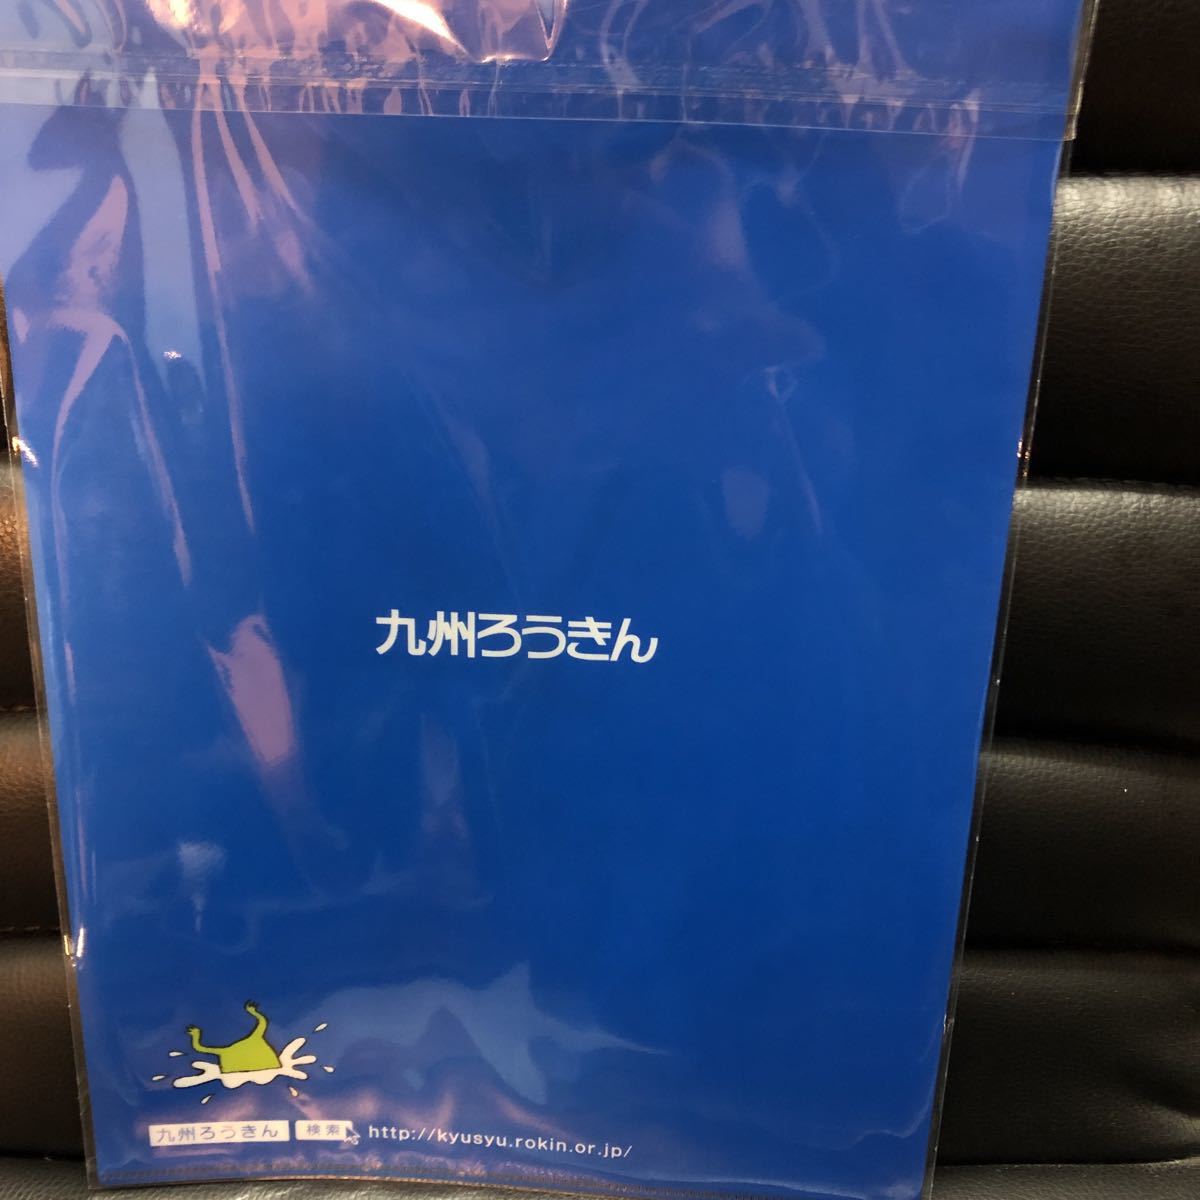  unused * Hashimoto ..* not for sale clear file |. present ground thing! Kyushu . float .**